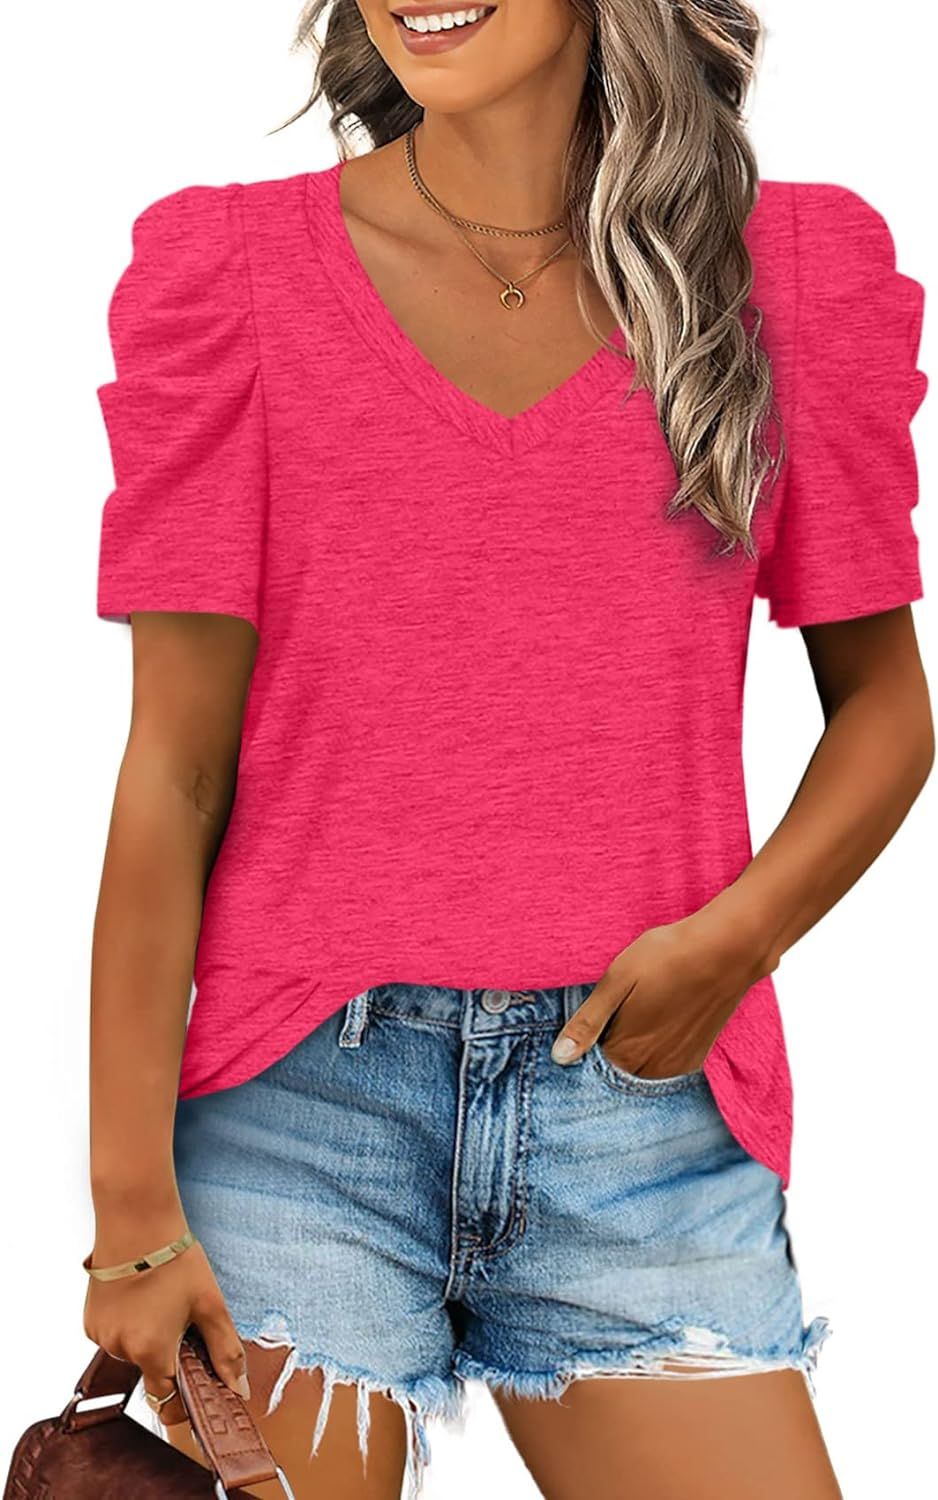 XIEERDUO Womens Summer Shirt V Neck Casual Tshirts Puff Sleeve Tops for Women Solid Color XS-3XL | Amazon (US)